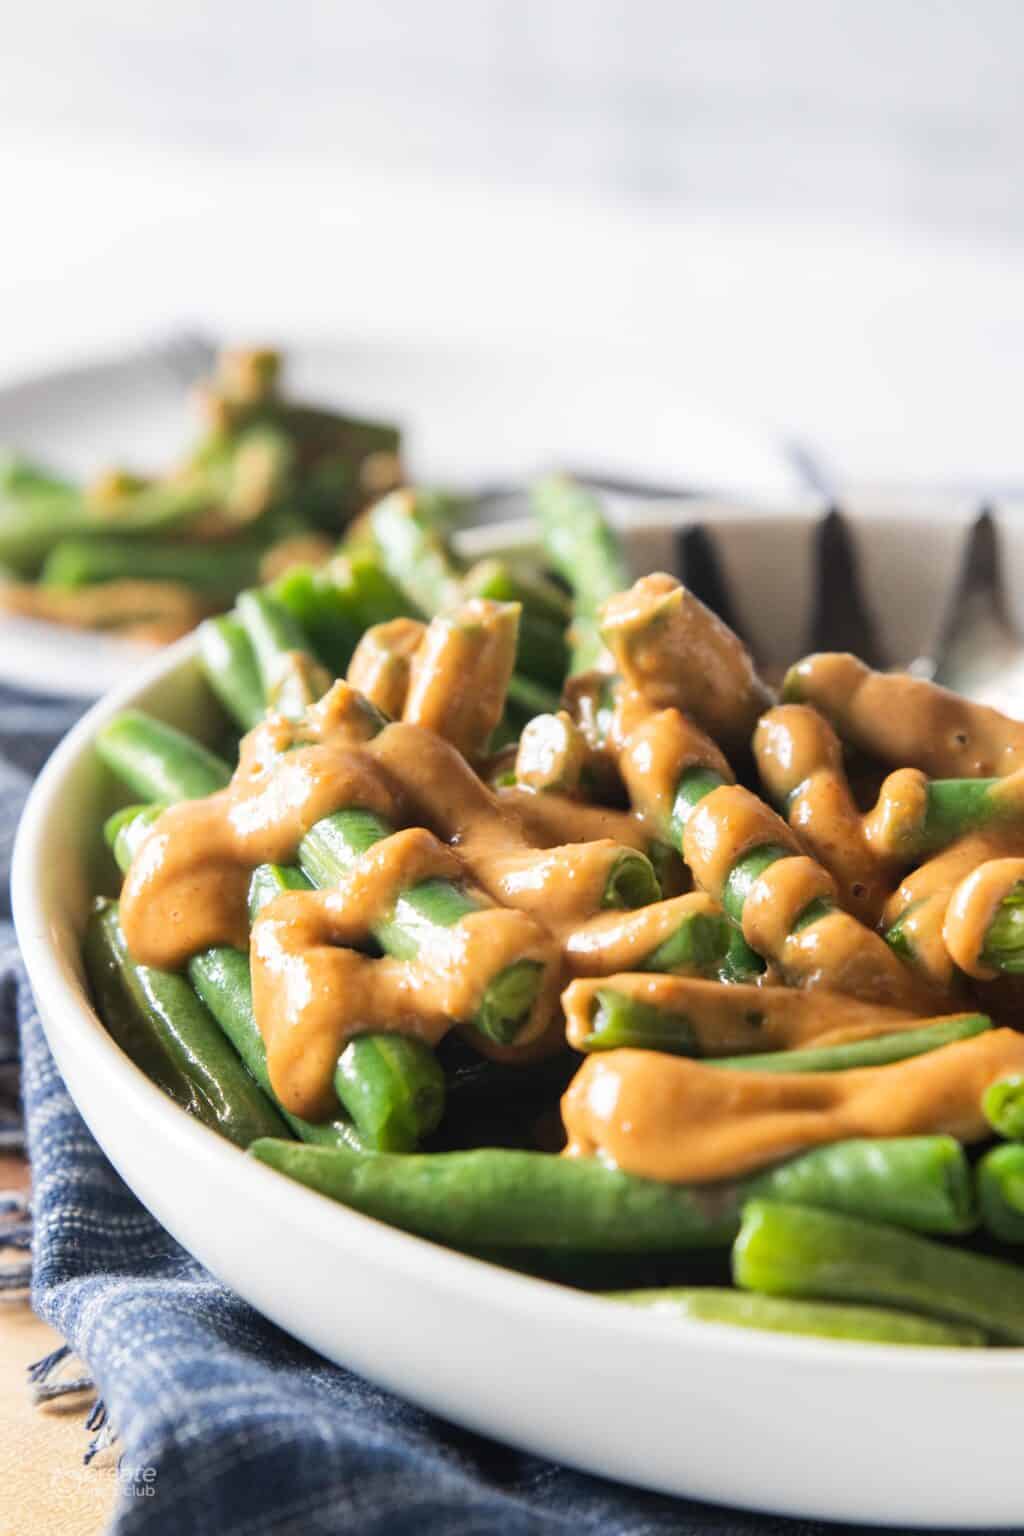 Green beans drizzled with peanut butter satay.